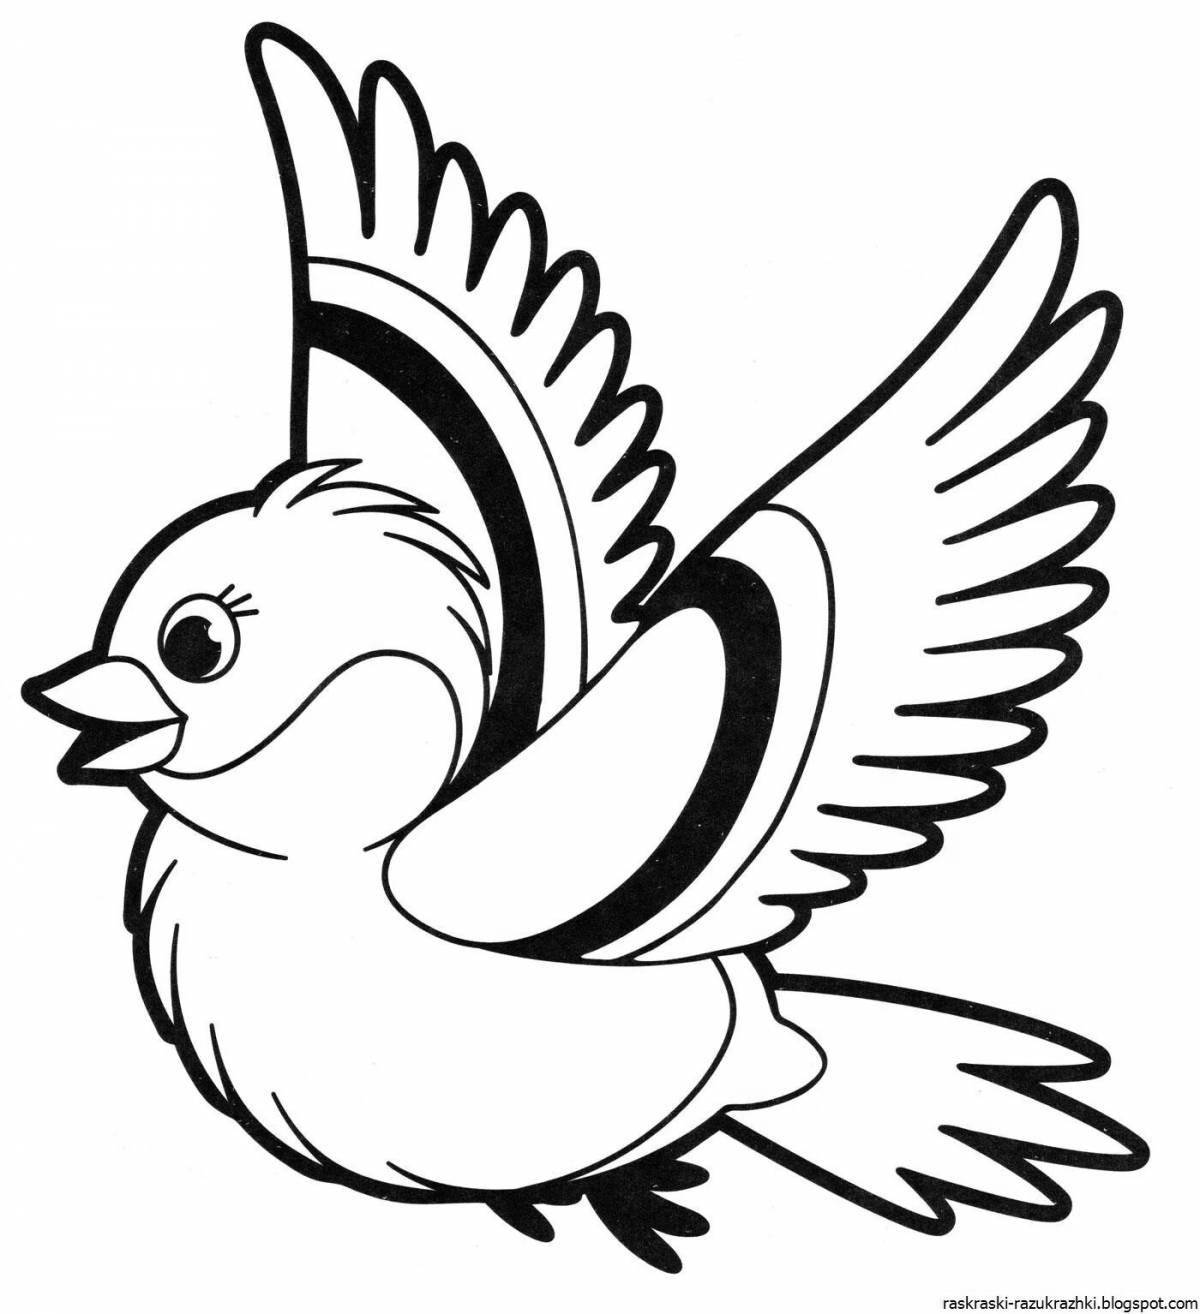 Exciting pre-k bird coloring page